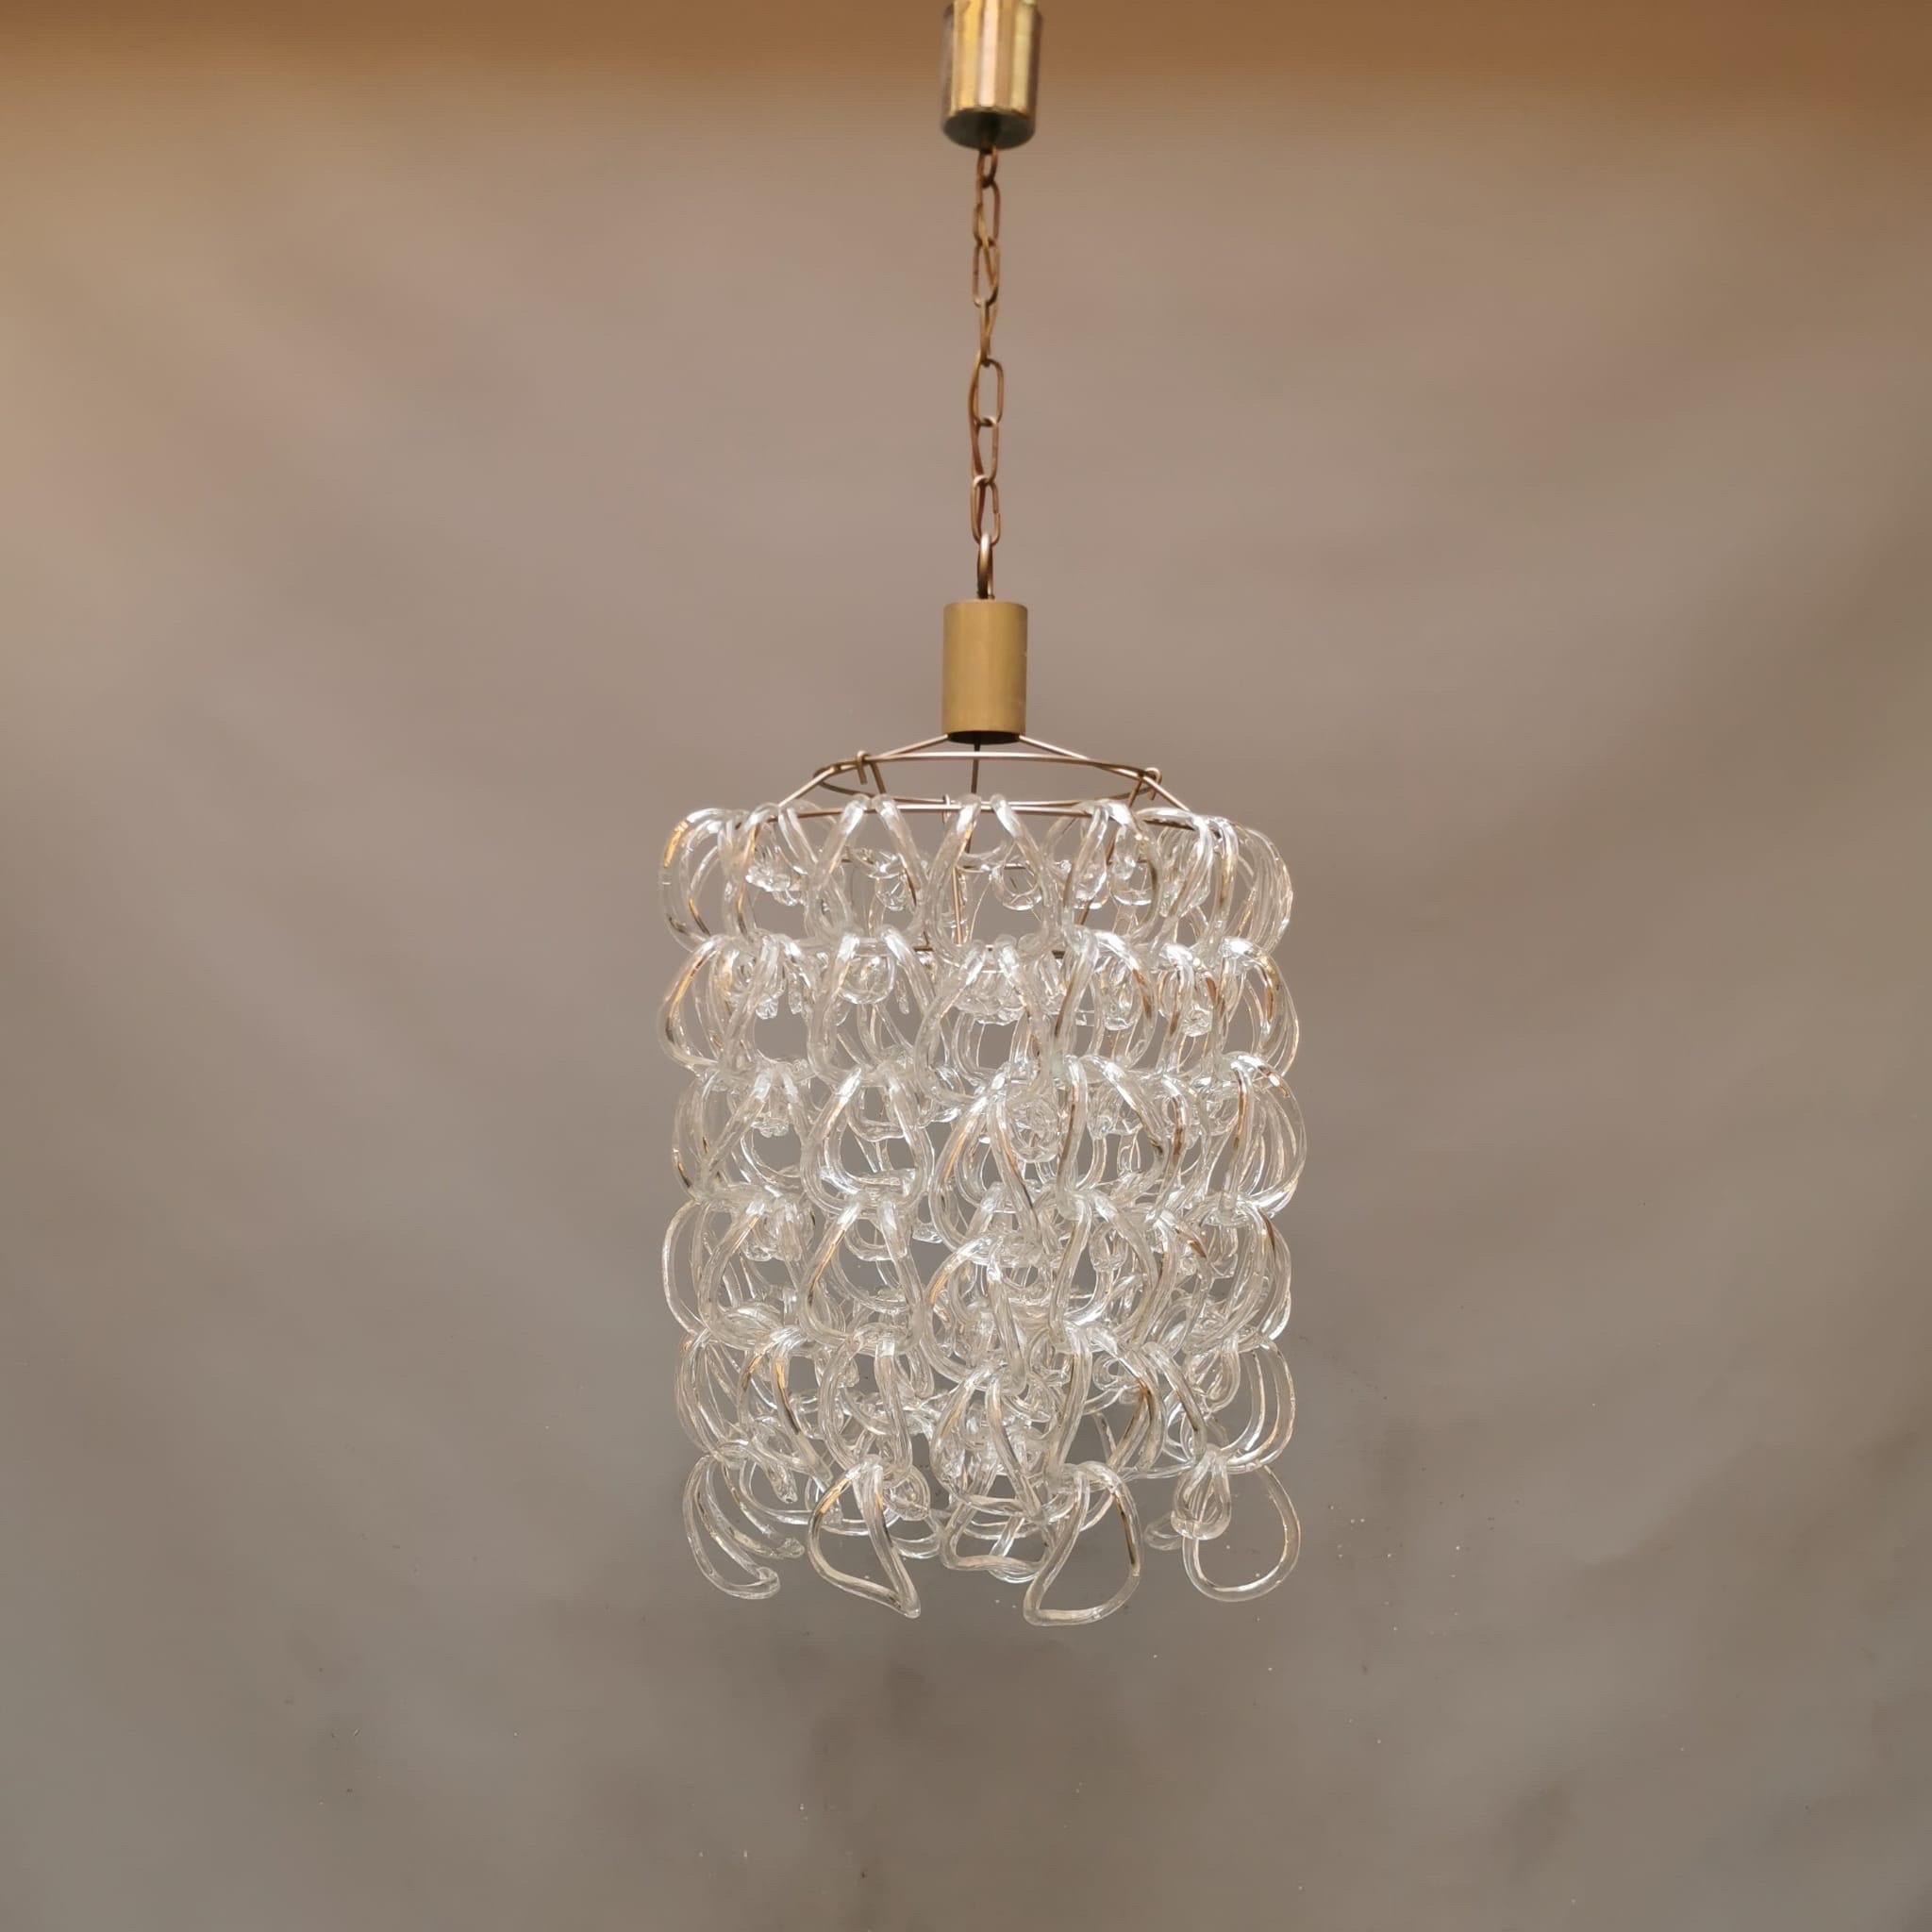 Giogali is a decorative lighting system based on the element of the modular crystal hook, where each hook has been hand-curved by master glassmakers in Murano, this sophisticated work was designed by Angelo Mangiarotti. His design work tends to